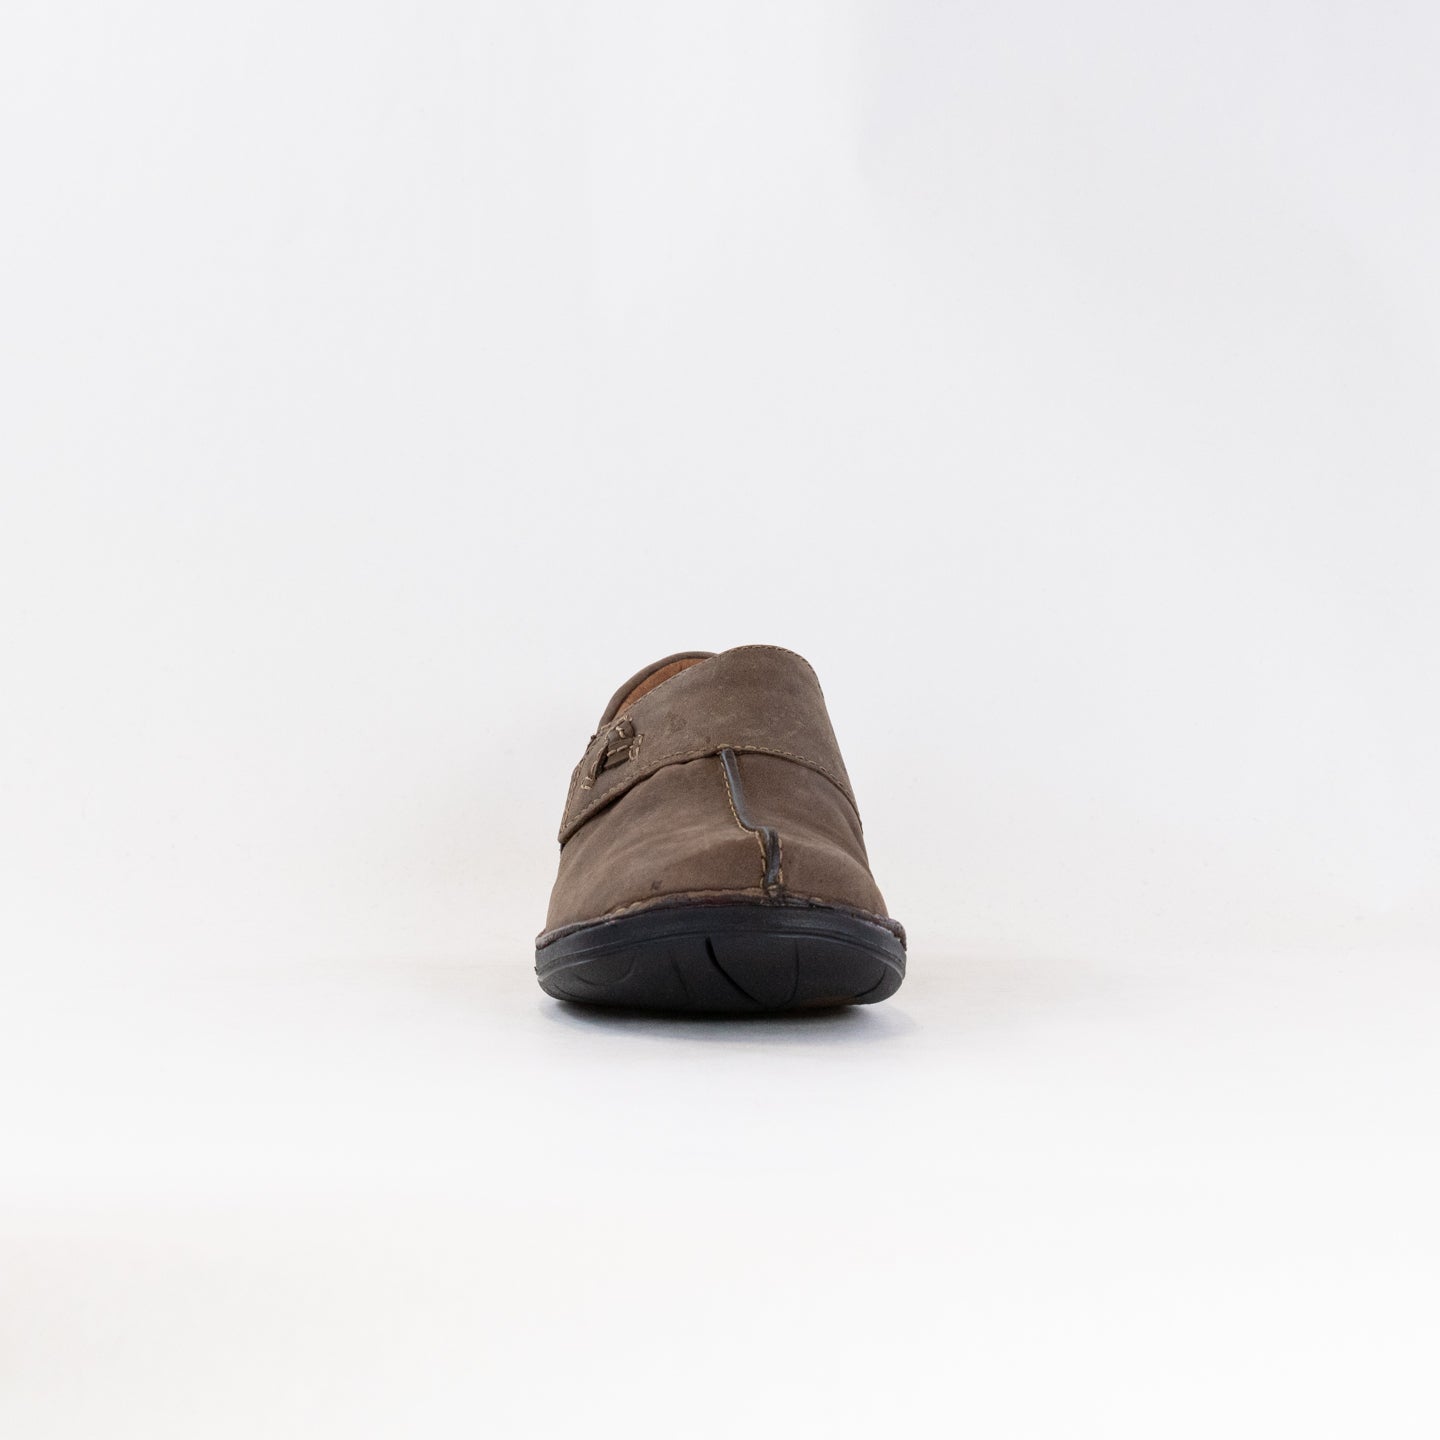 Clarks Un Loop Ave (Women's) - Taupe